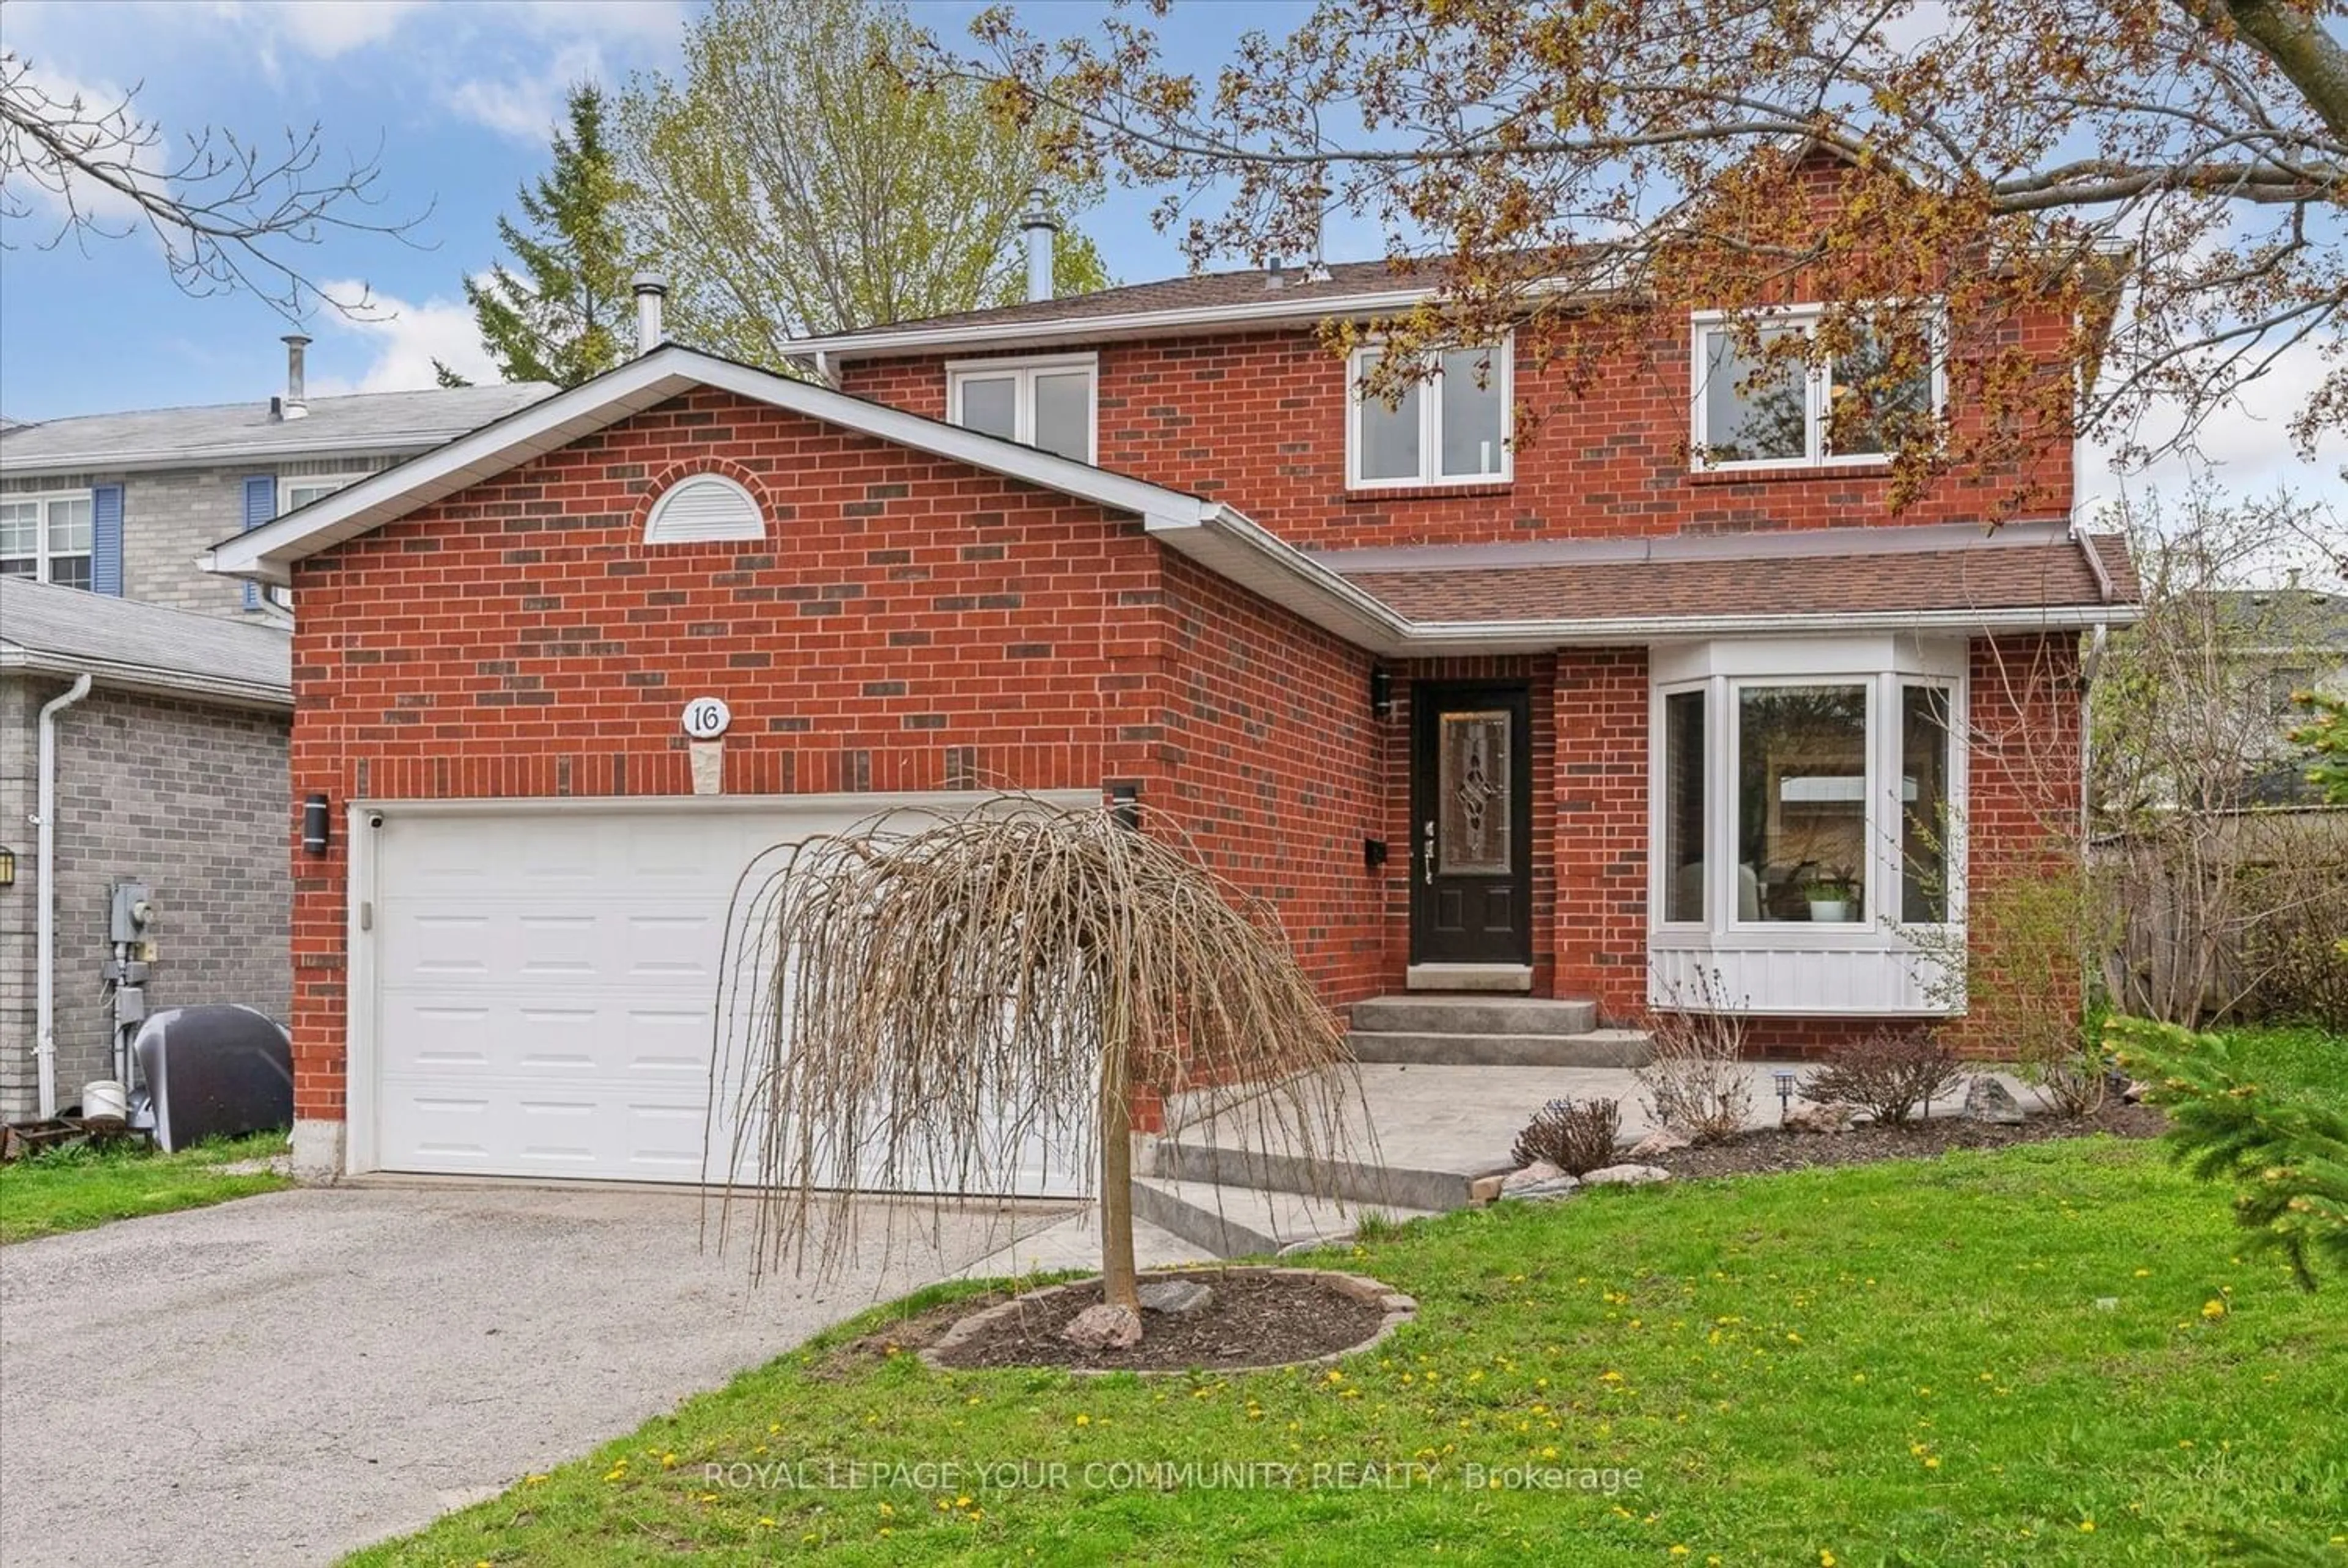 Home with brick exterior material for 16 Grasett Cres, Barrie Ontario L4N 6Z8